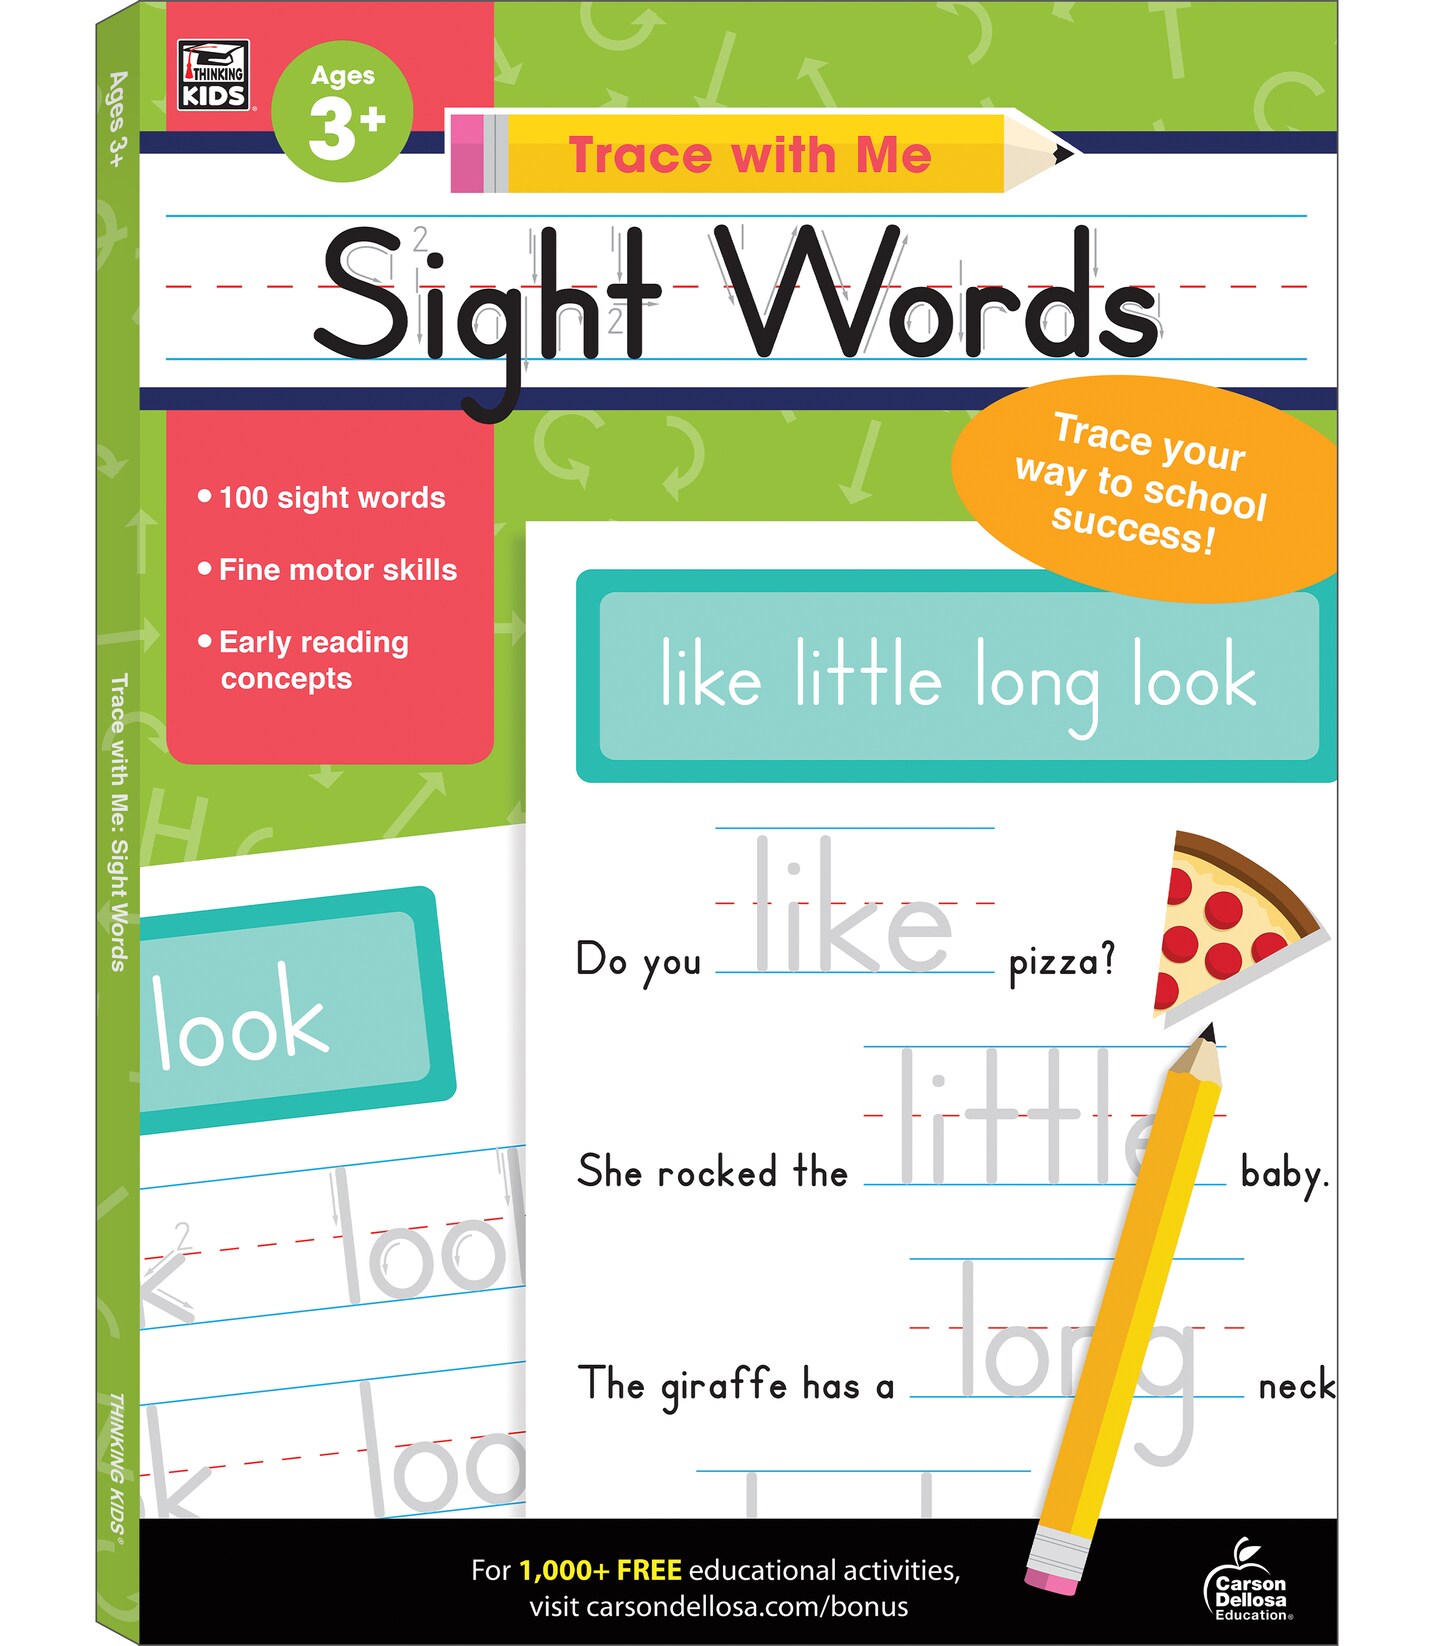 Carson Dellosa Trace With Me: Sight Words Handwriting Workbook for Kids Ages 3+, Sight Words Handwriting Practice for Preschool, Kindergarten, 1st Grade, 2nd Grade, PreK+ Phonics &#x26; Writing Practice